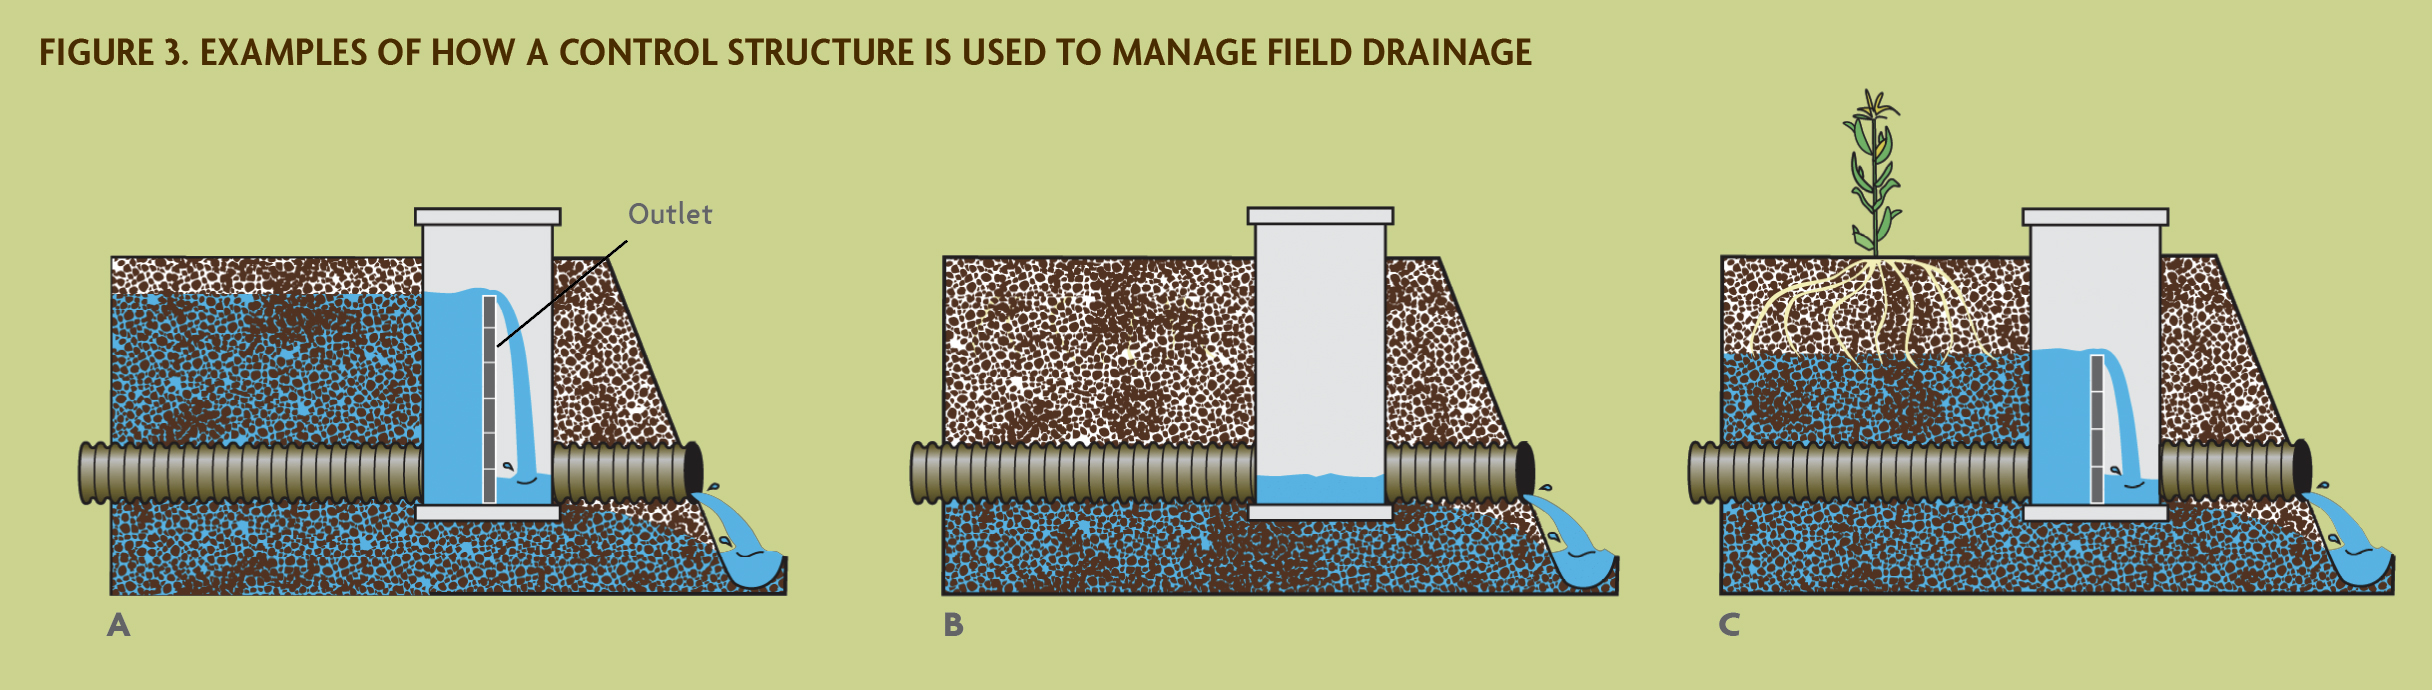 7 Water Management Solutions for Proper Drainage